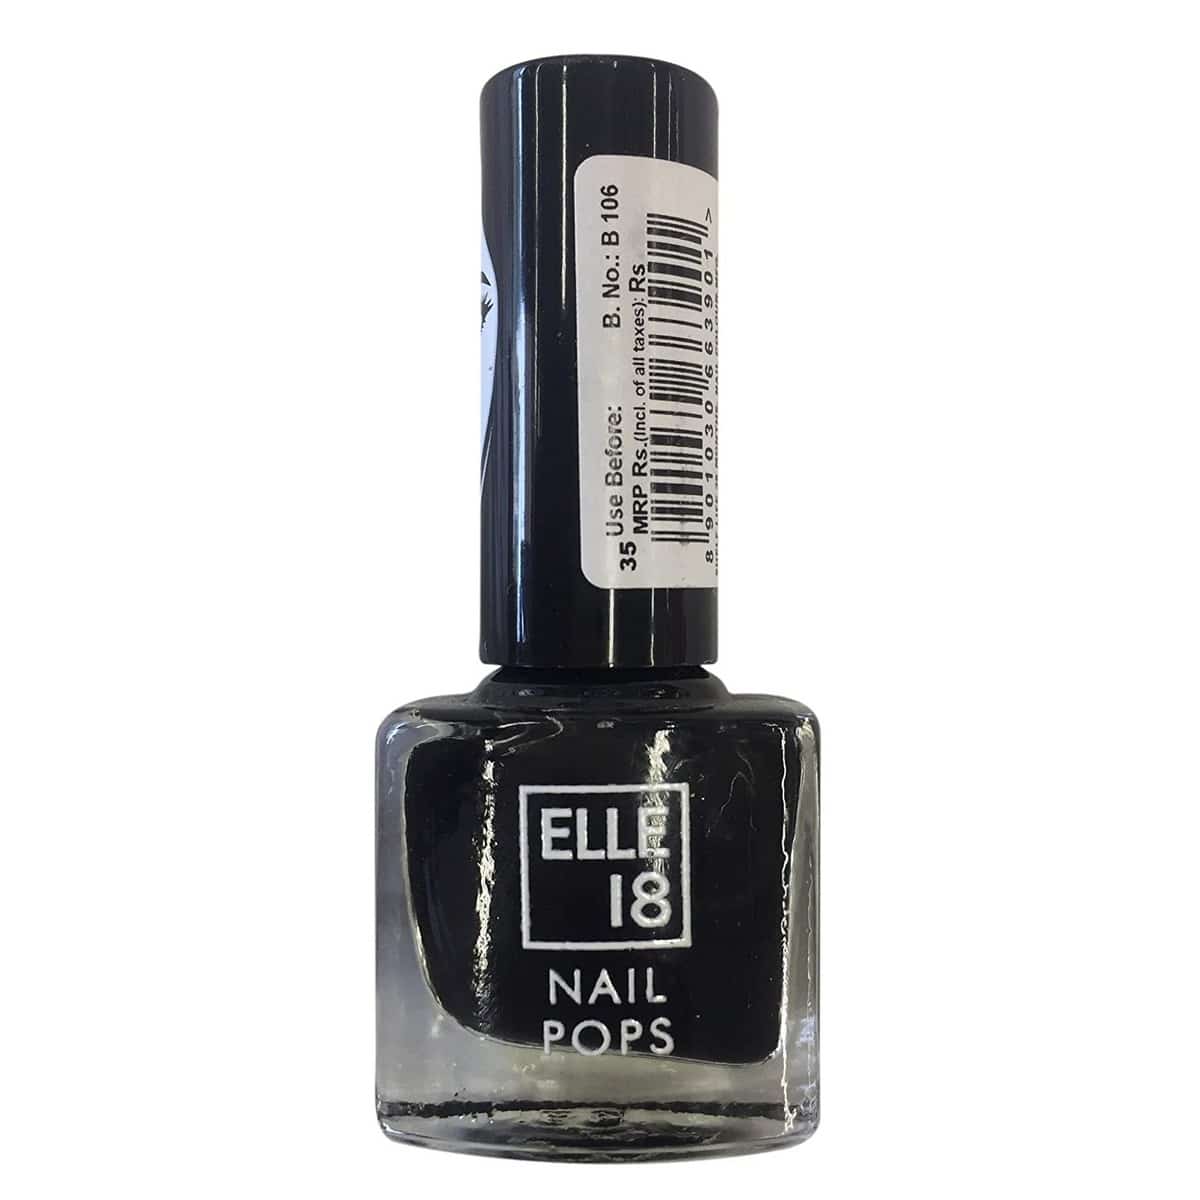 Buy Elle18 Nail Pops Nail Color 172, Glossy & Matte Finish, 5ml Online at  Low Prices in India - Amazon.in